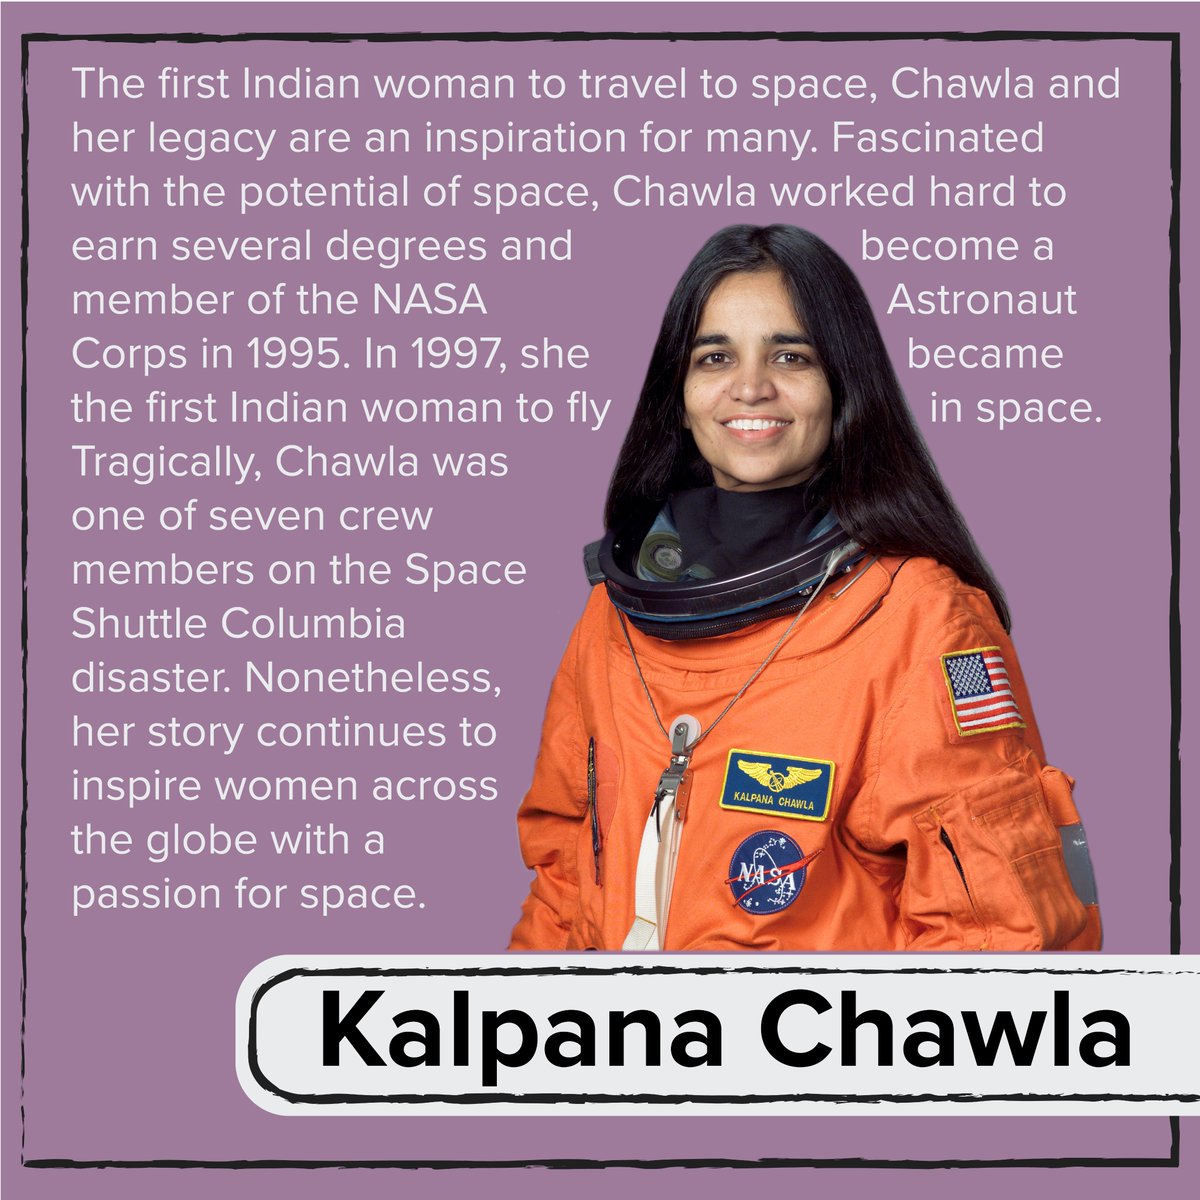 Kalpana Chawla was a  @NASA astronaut and the first Indian woman to fly in space. While her life was tragically lost on the Space Shuttle Columbia disaster, her legacy continues to inspire generations.